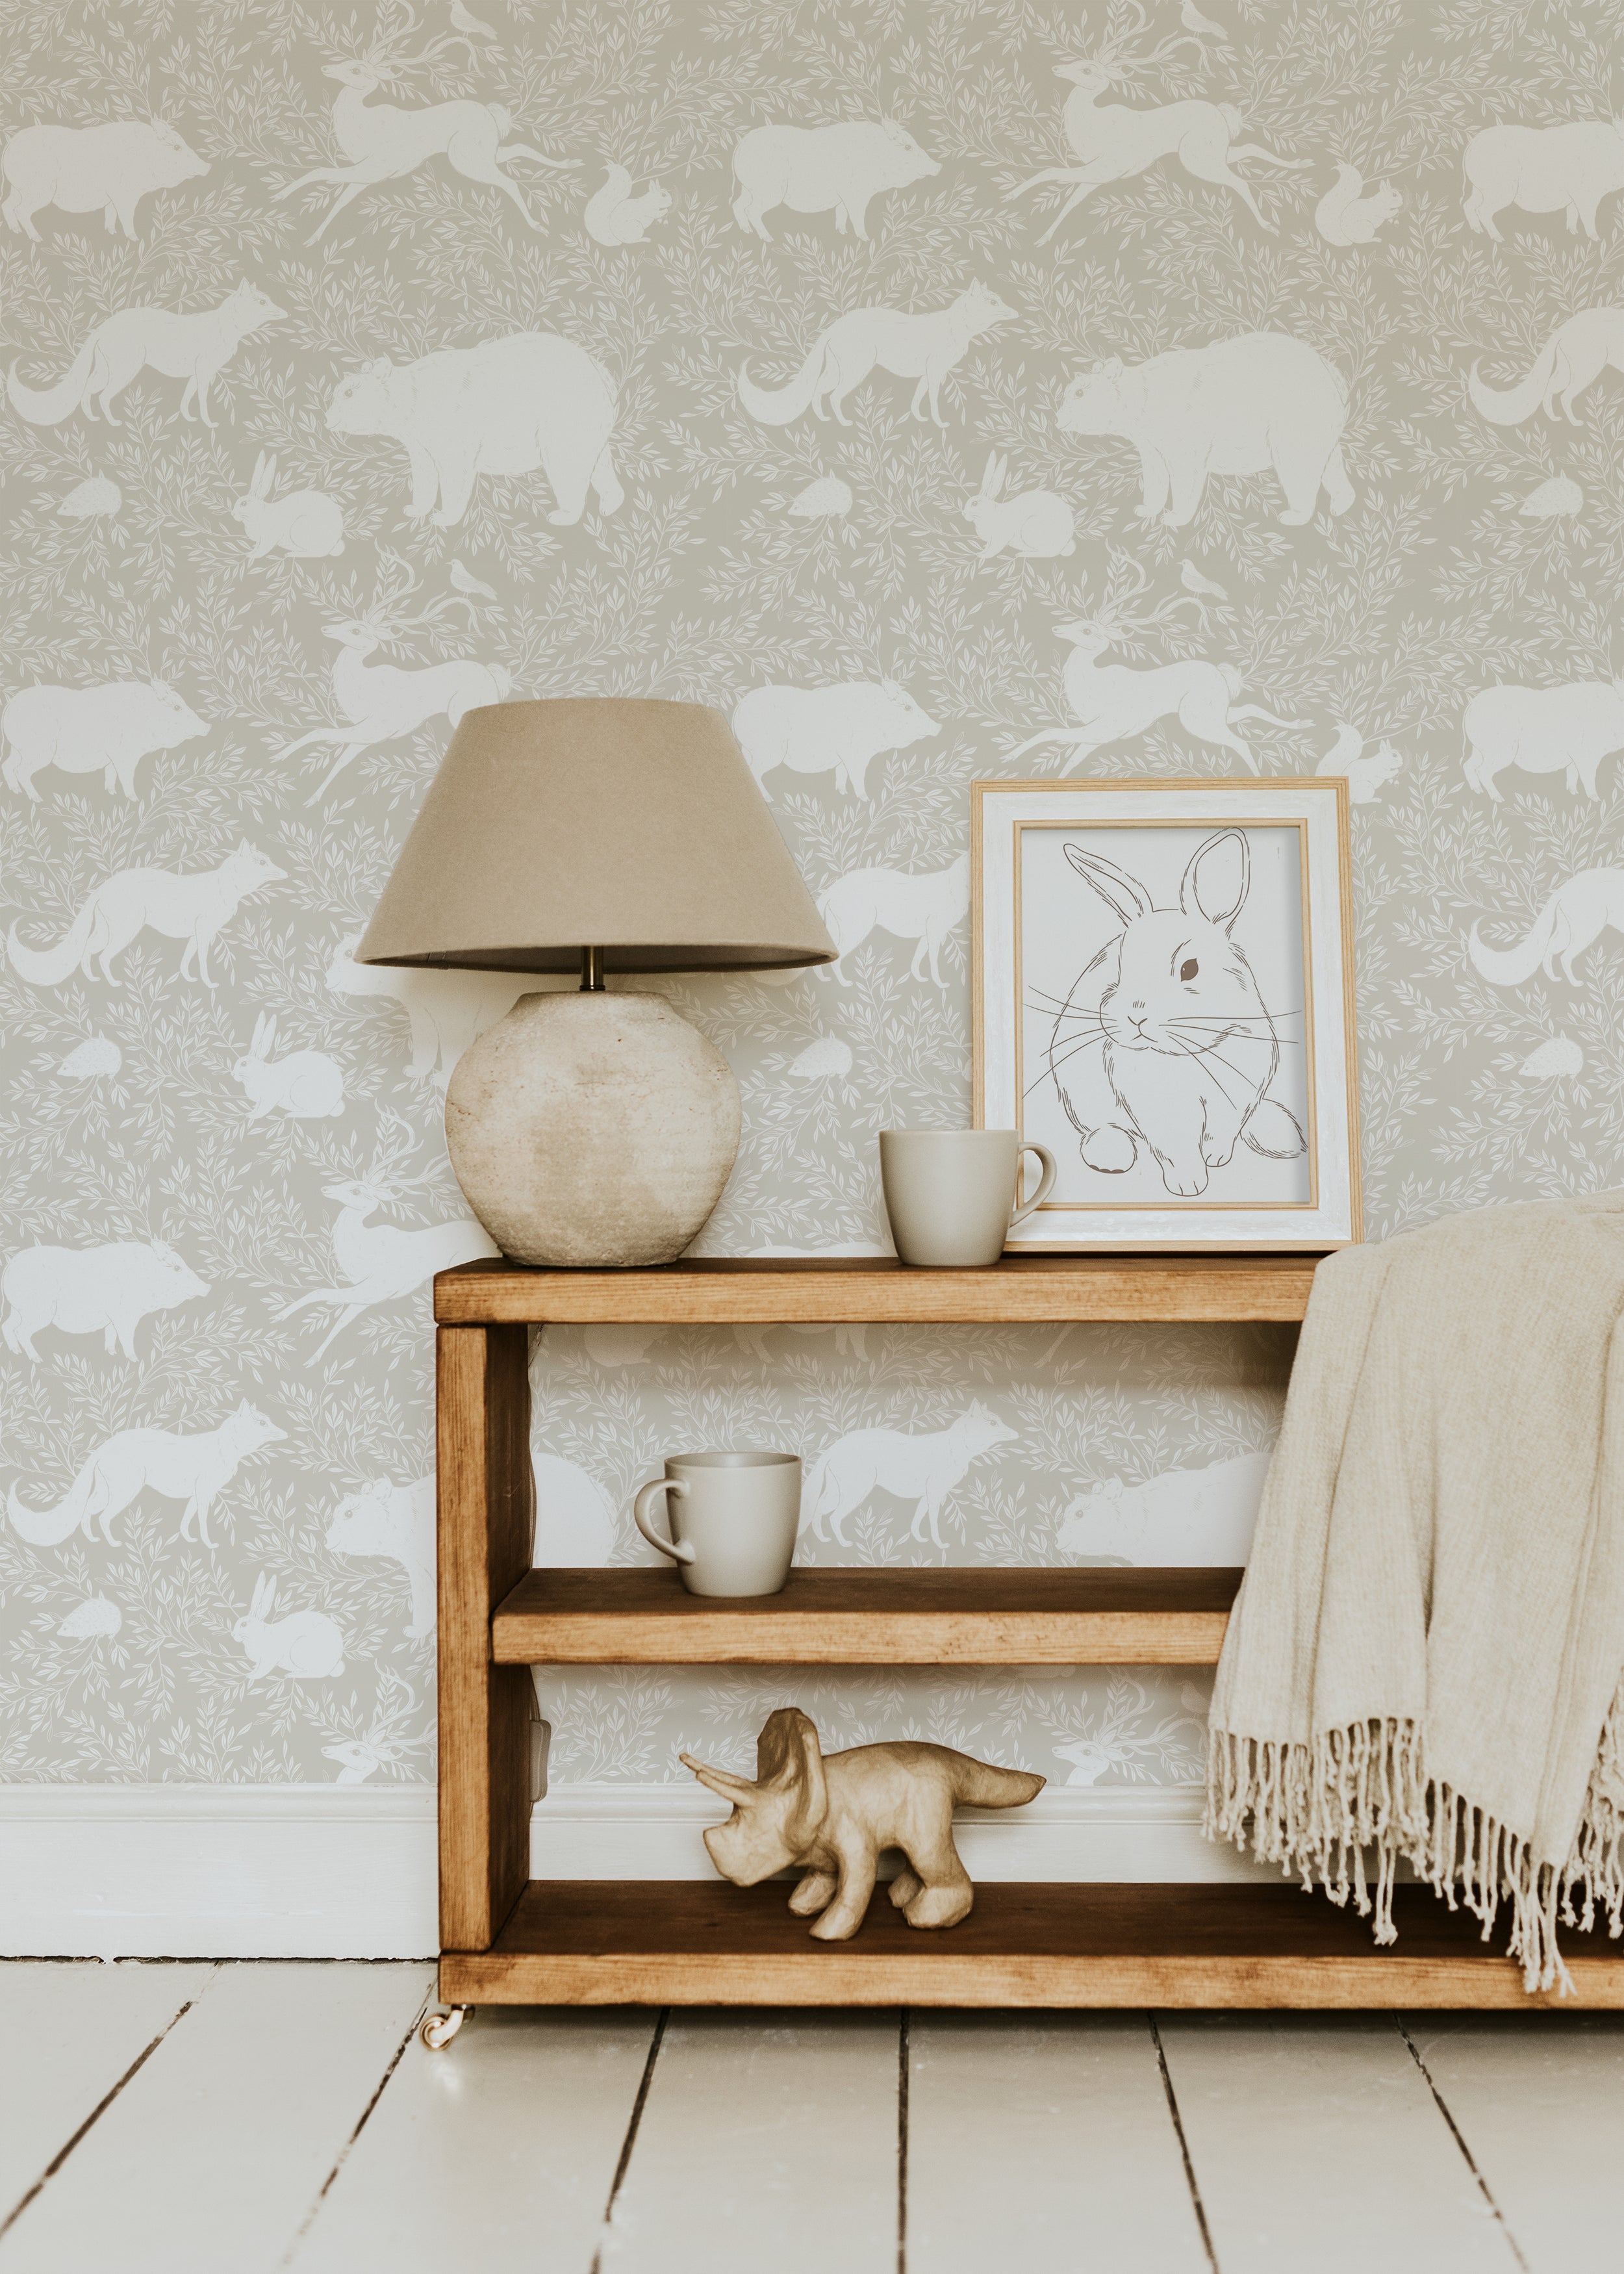 A home office with a light wooden desk and white chair placed against a warm beige wallpaper adorned with white woodland animals including bears, foxes, and rabbits, creating a calming and natural ambiance